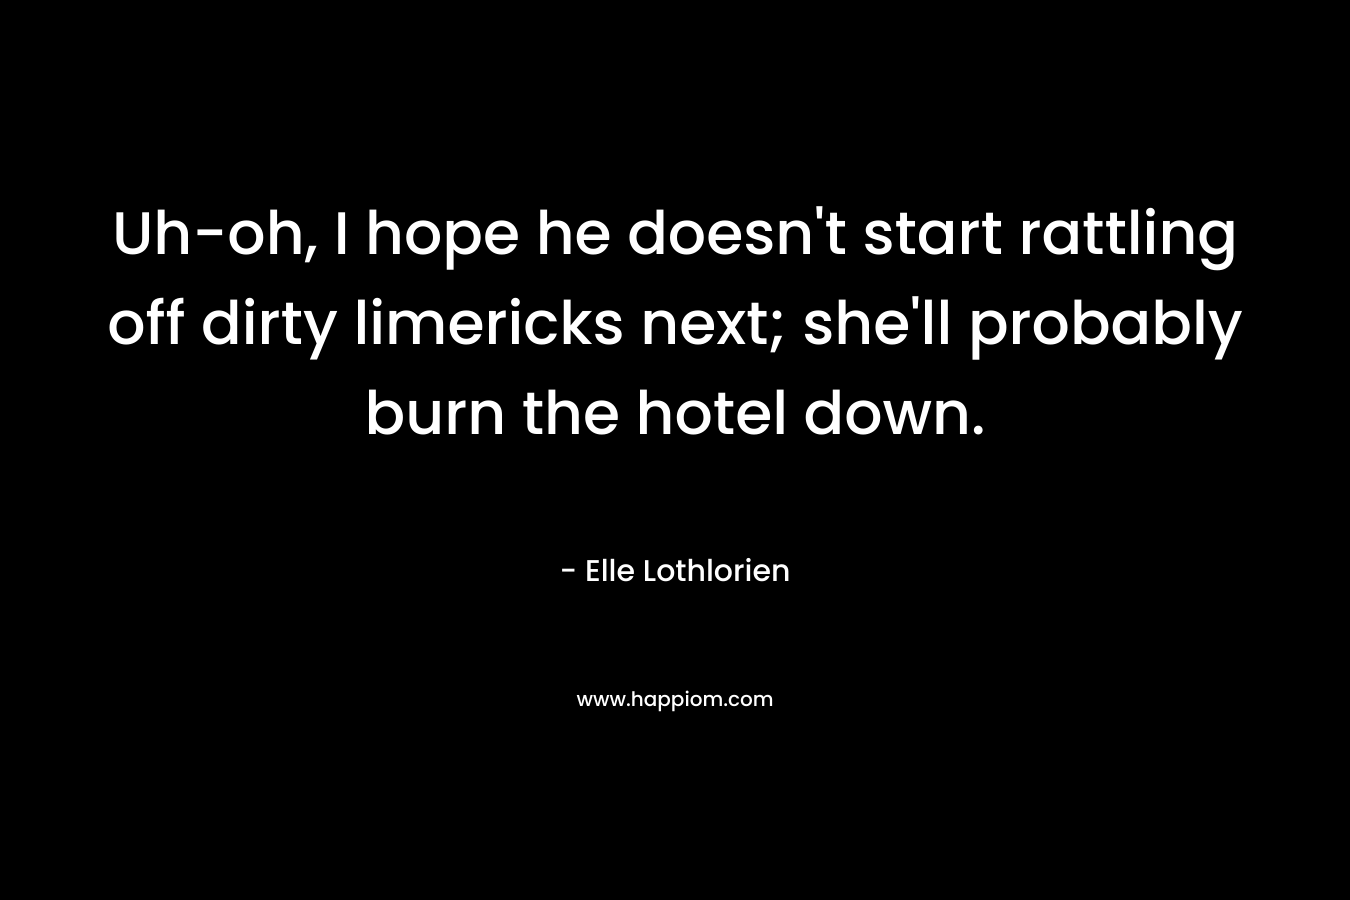 Uh-oh, I hope he doesn't start rattling off dirty limericks next; she'll probably burn the hotel down.